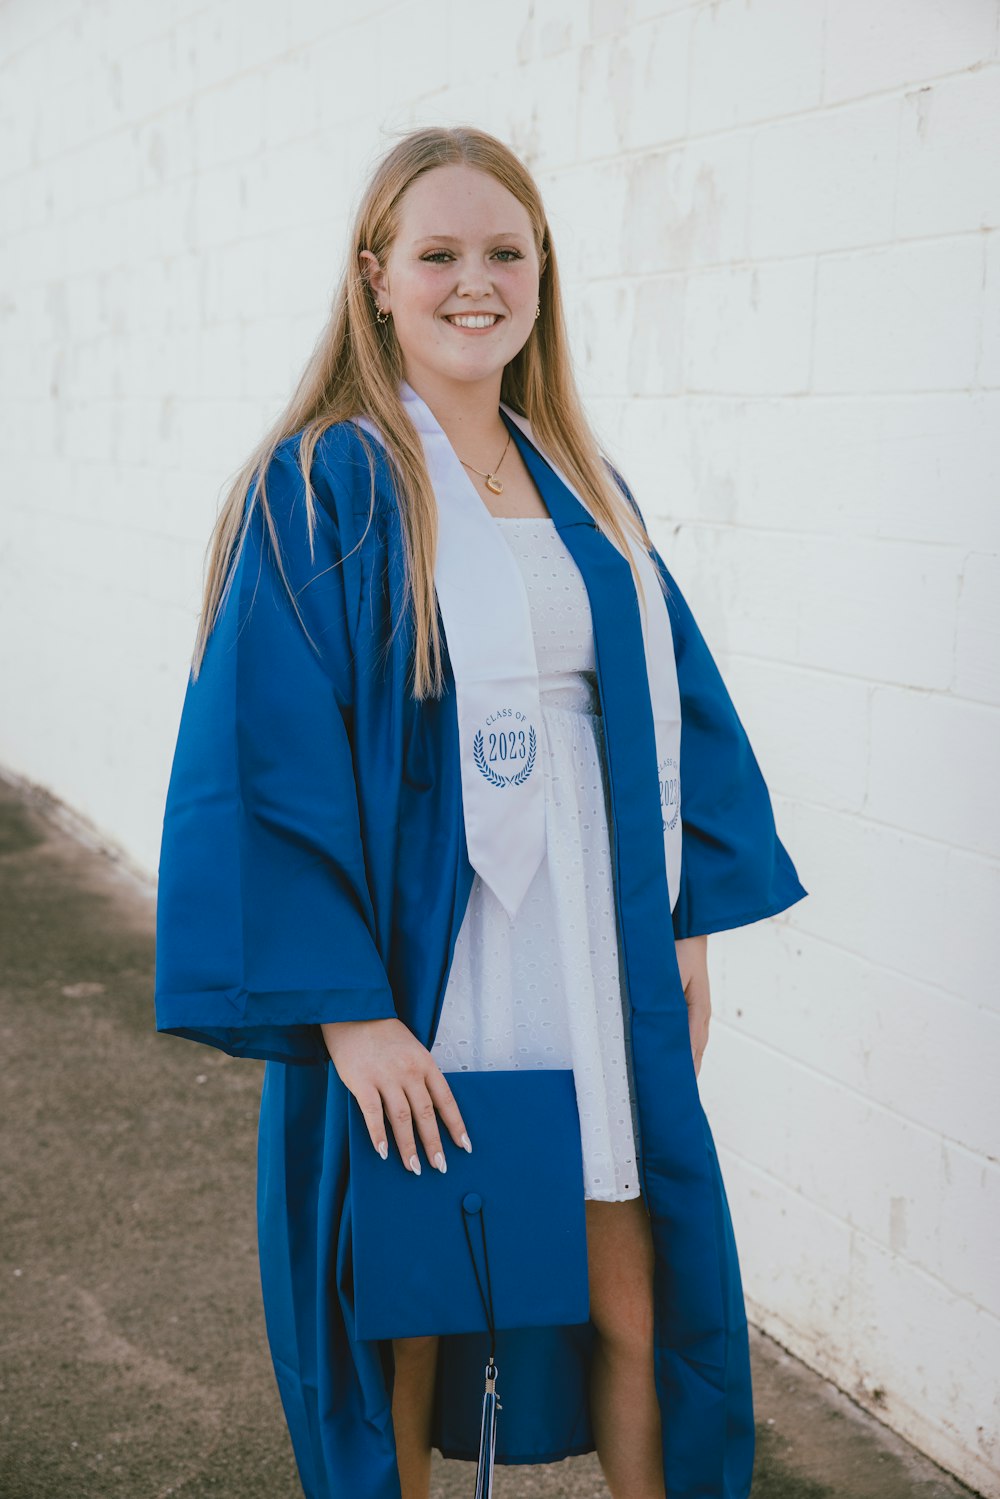 a woman in a blue graduation gown posing for a picture